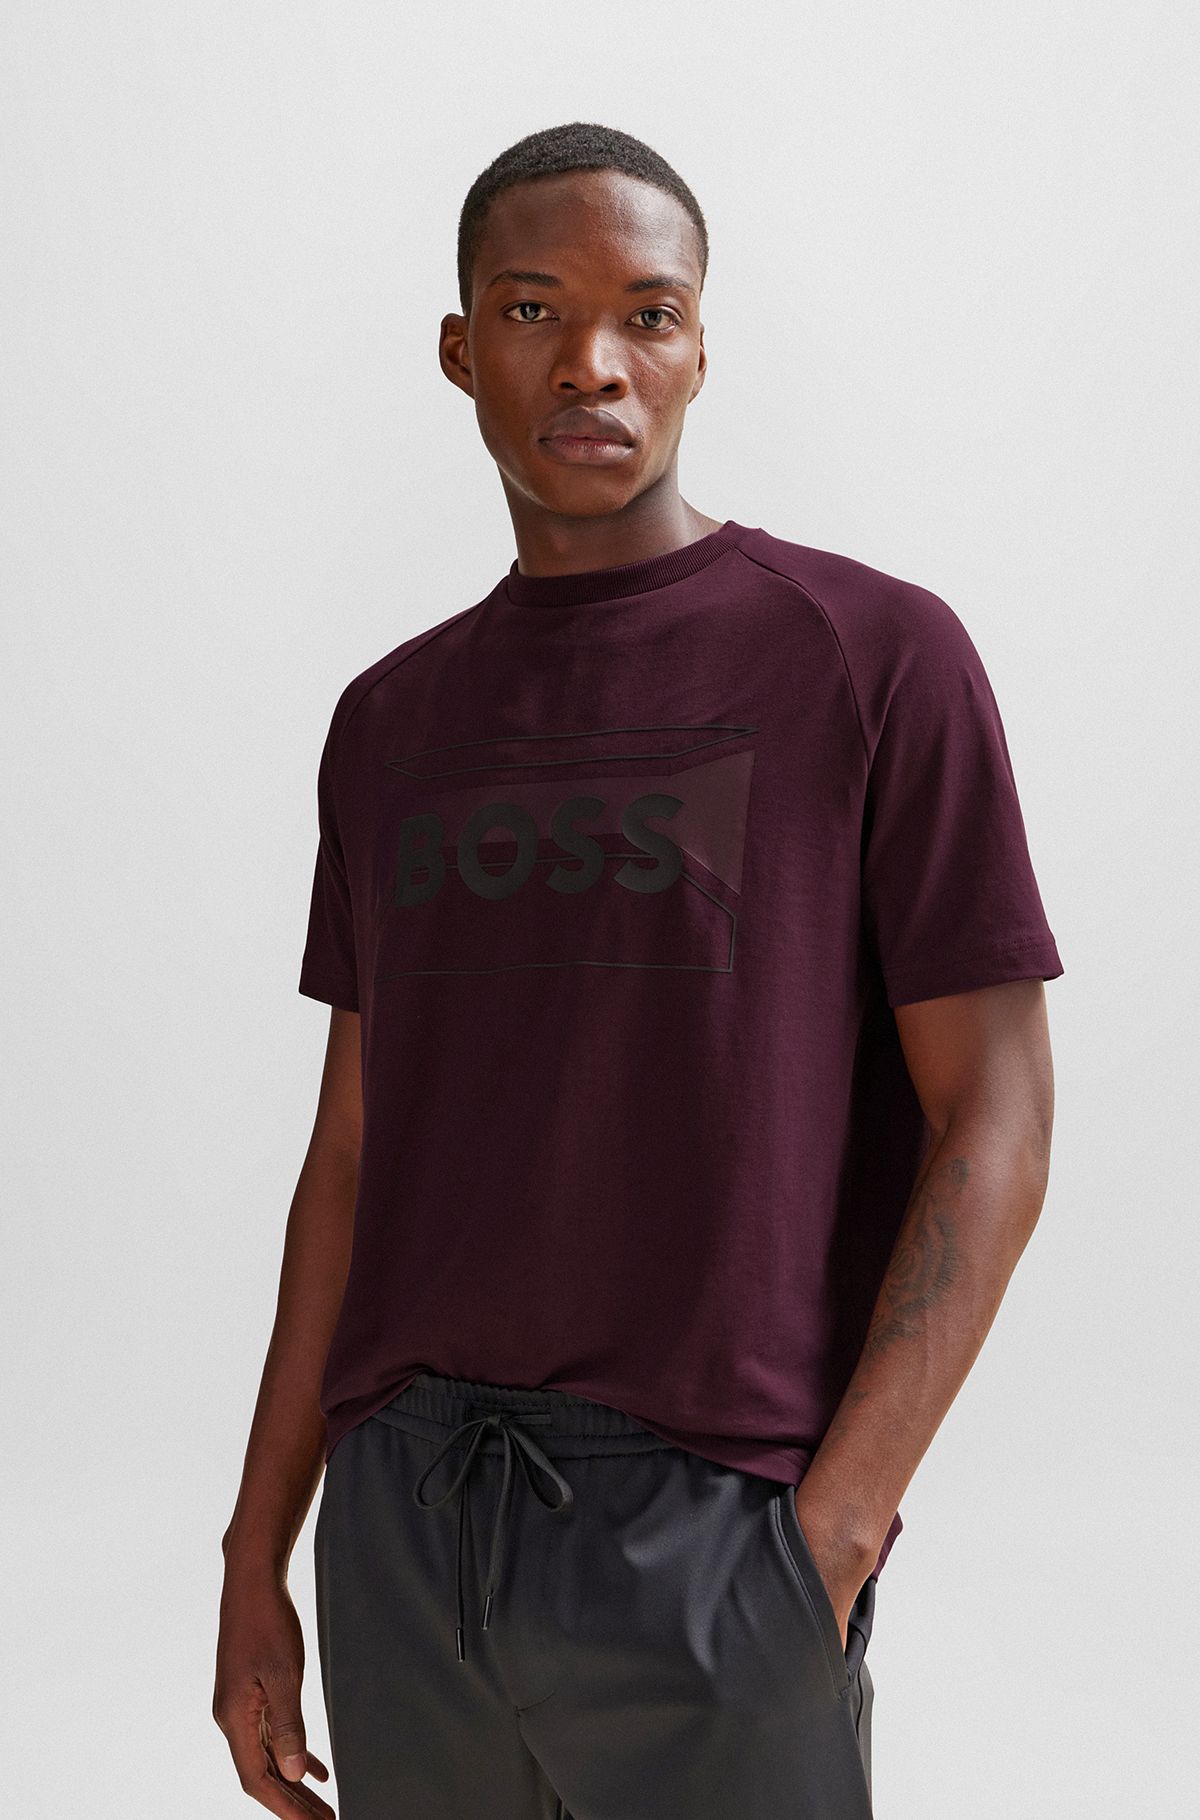 by HUGO BOSS in Pink T-Shirts | Men